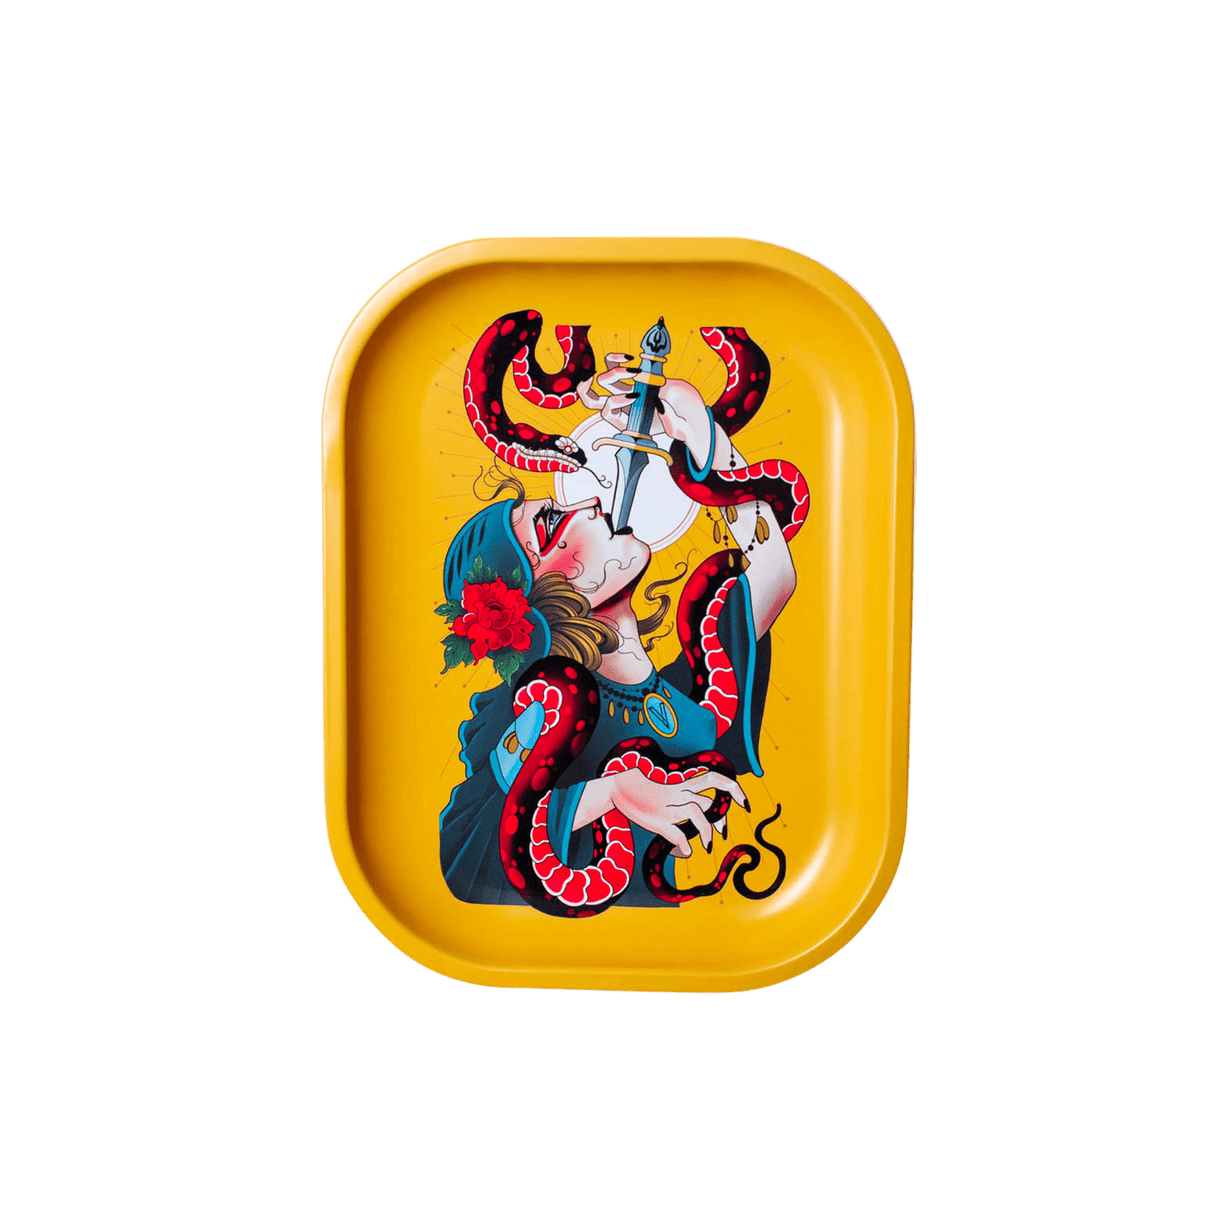 V Syndicate Serpentine Metal Rollin' Tray with vibrant yellow background and novelty design, perfect for dry herbs.